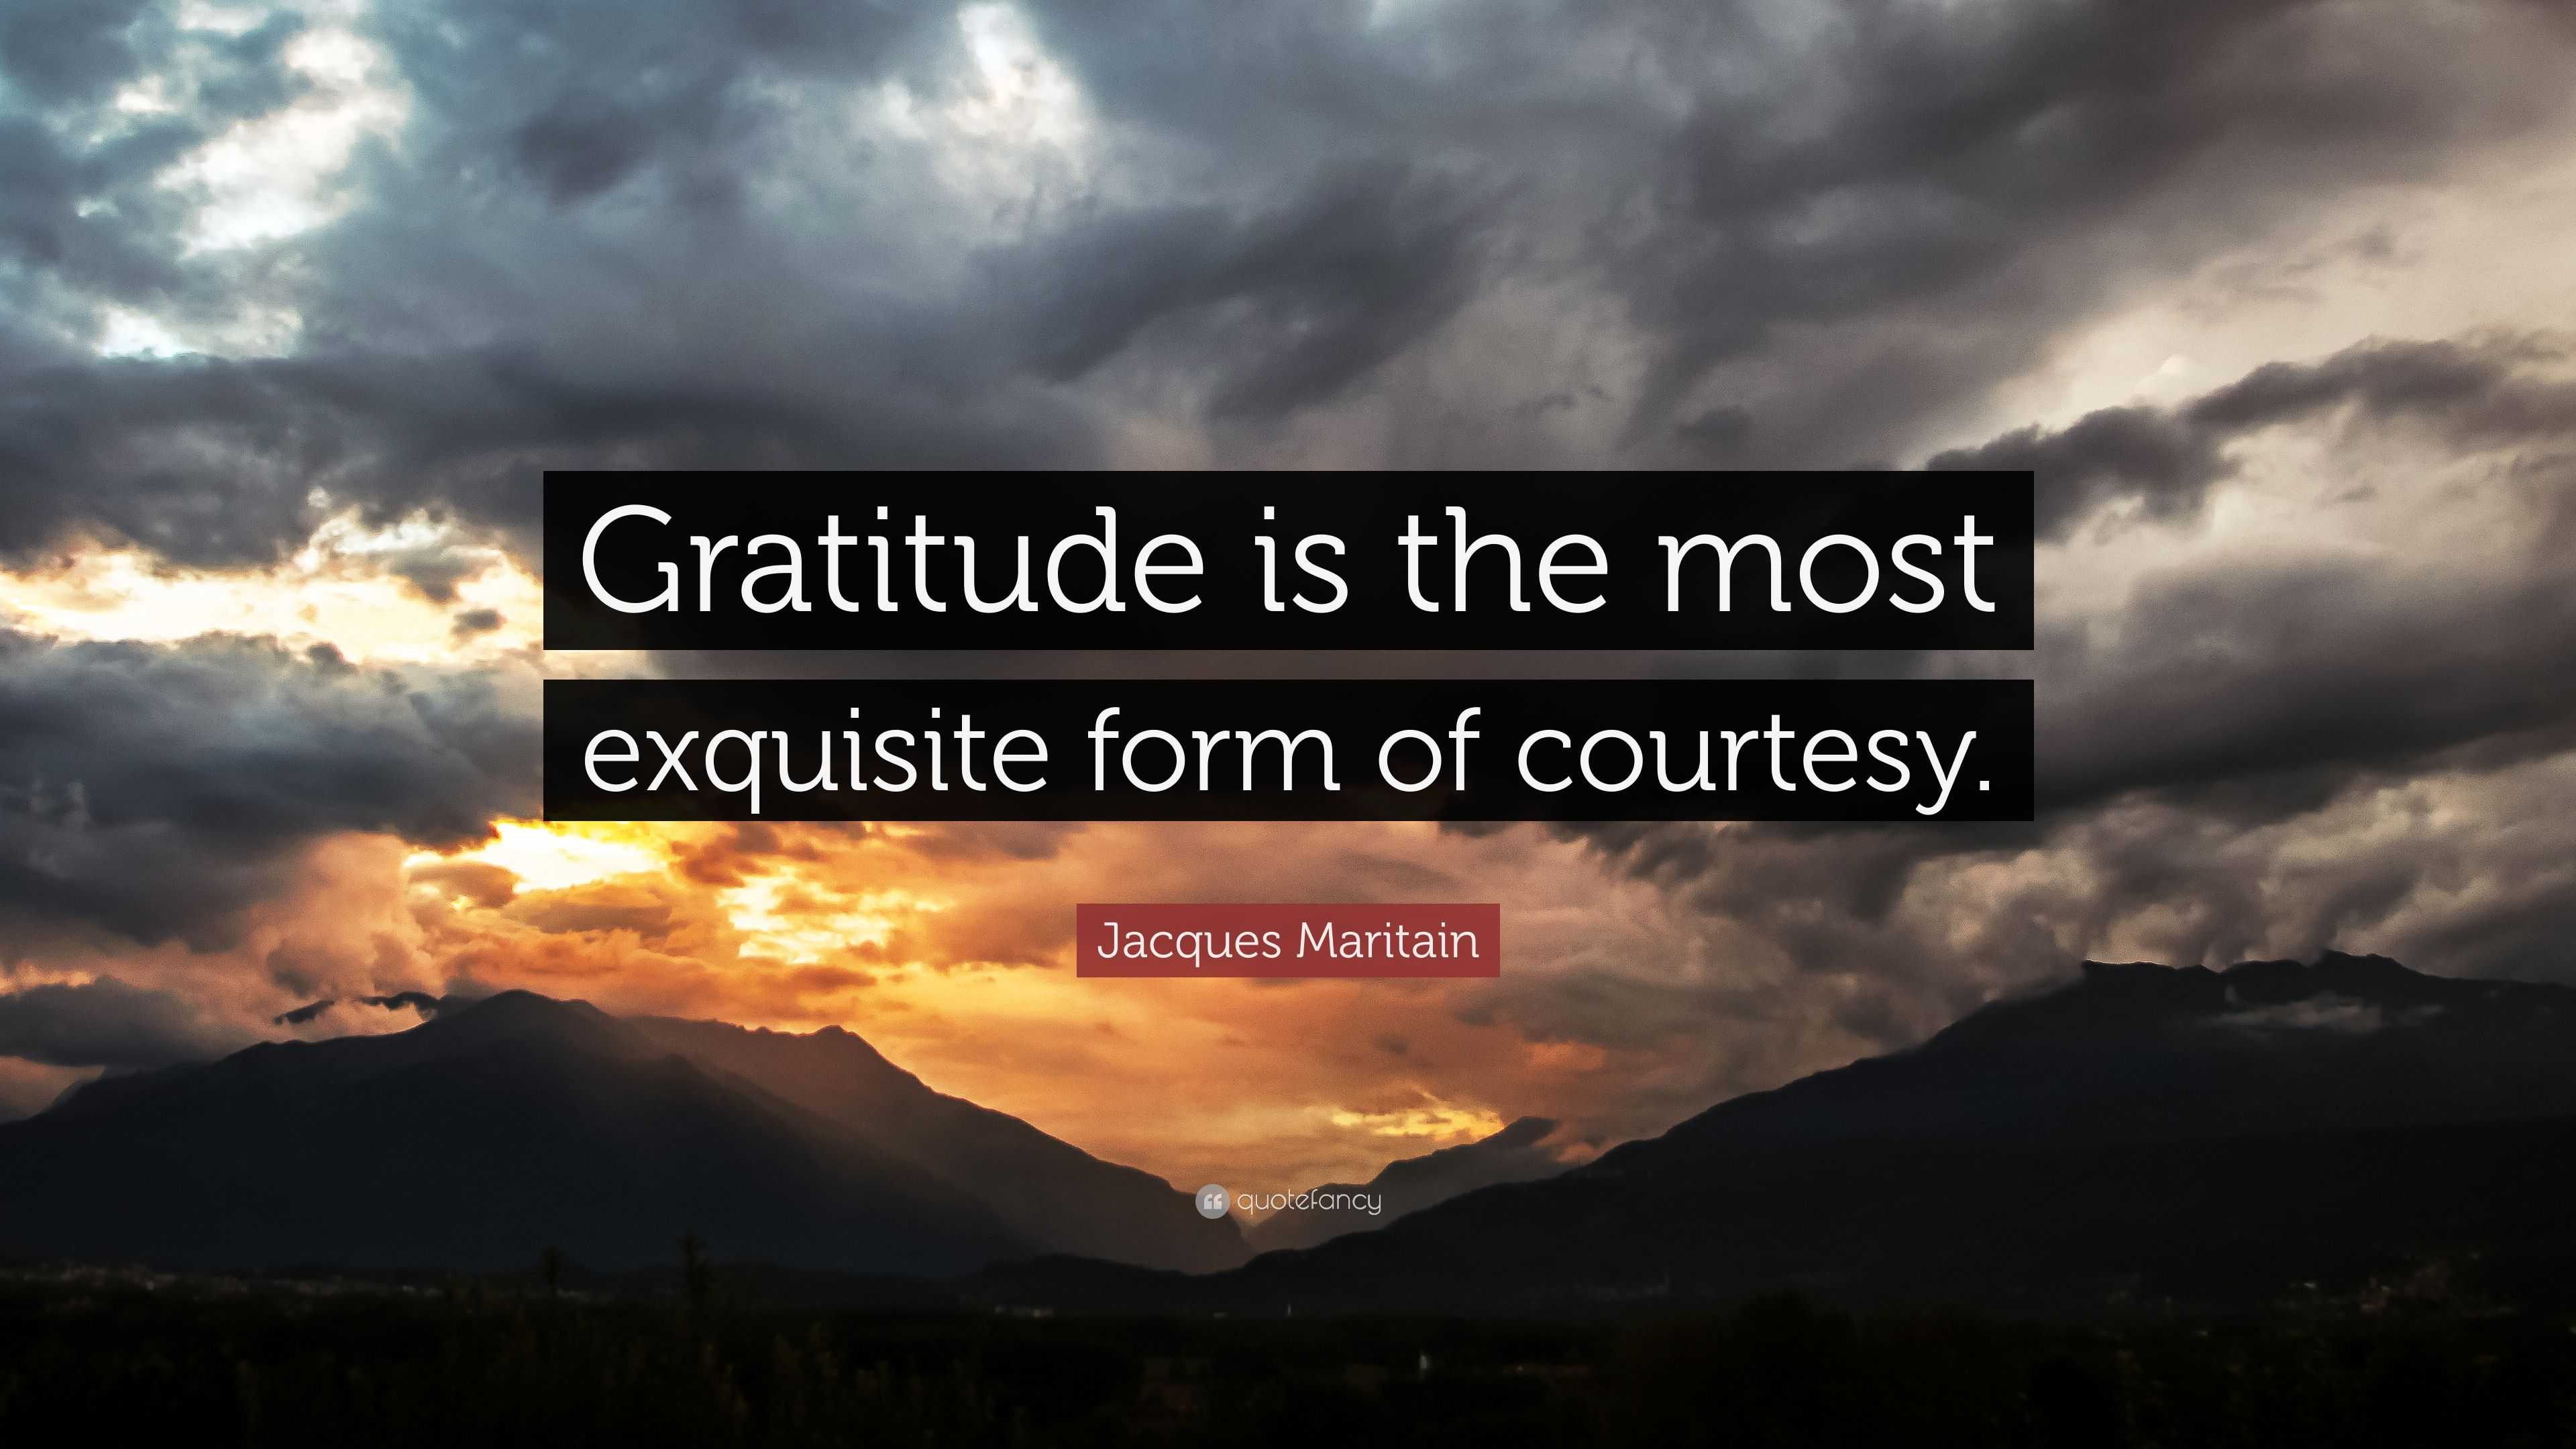 Jacques Maritain - Gratitude is the most exquisite form of